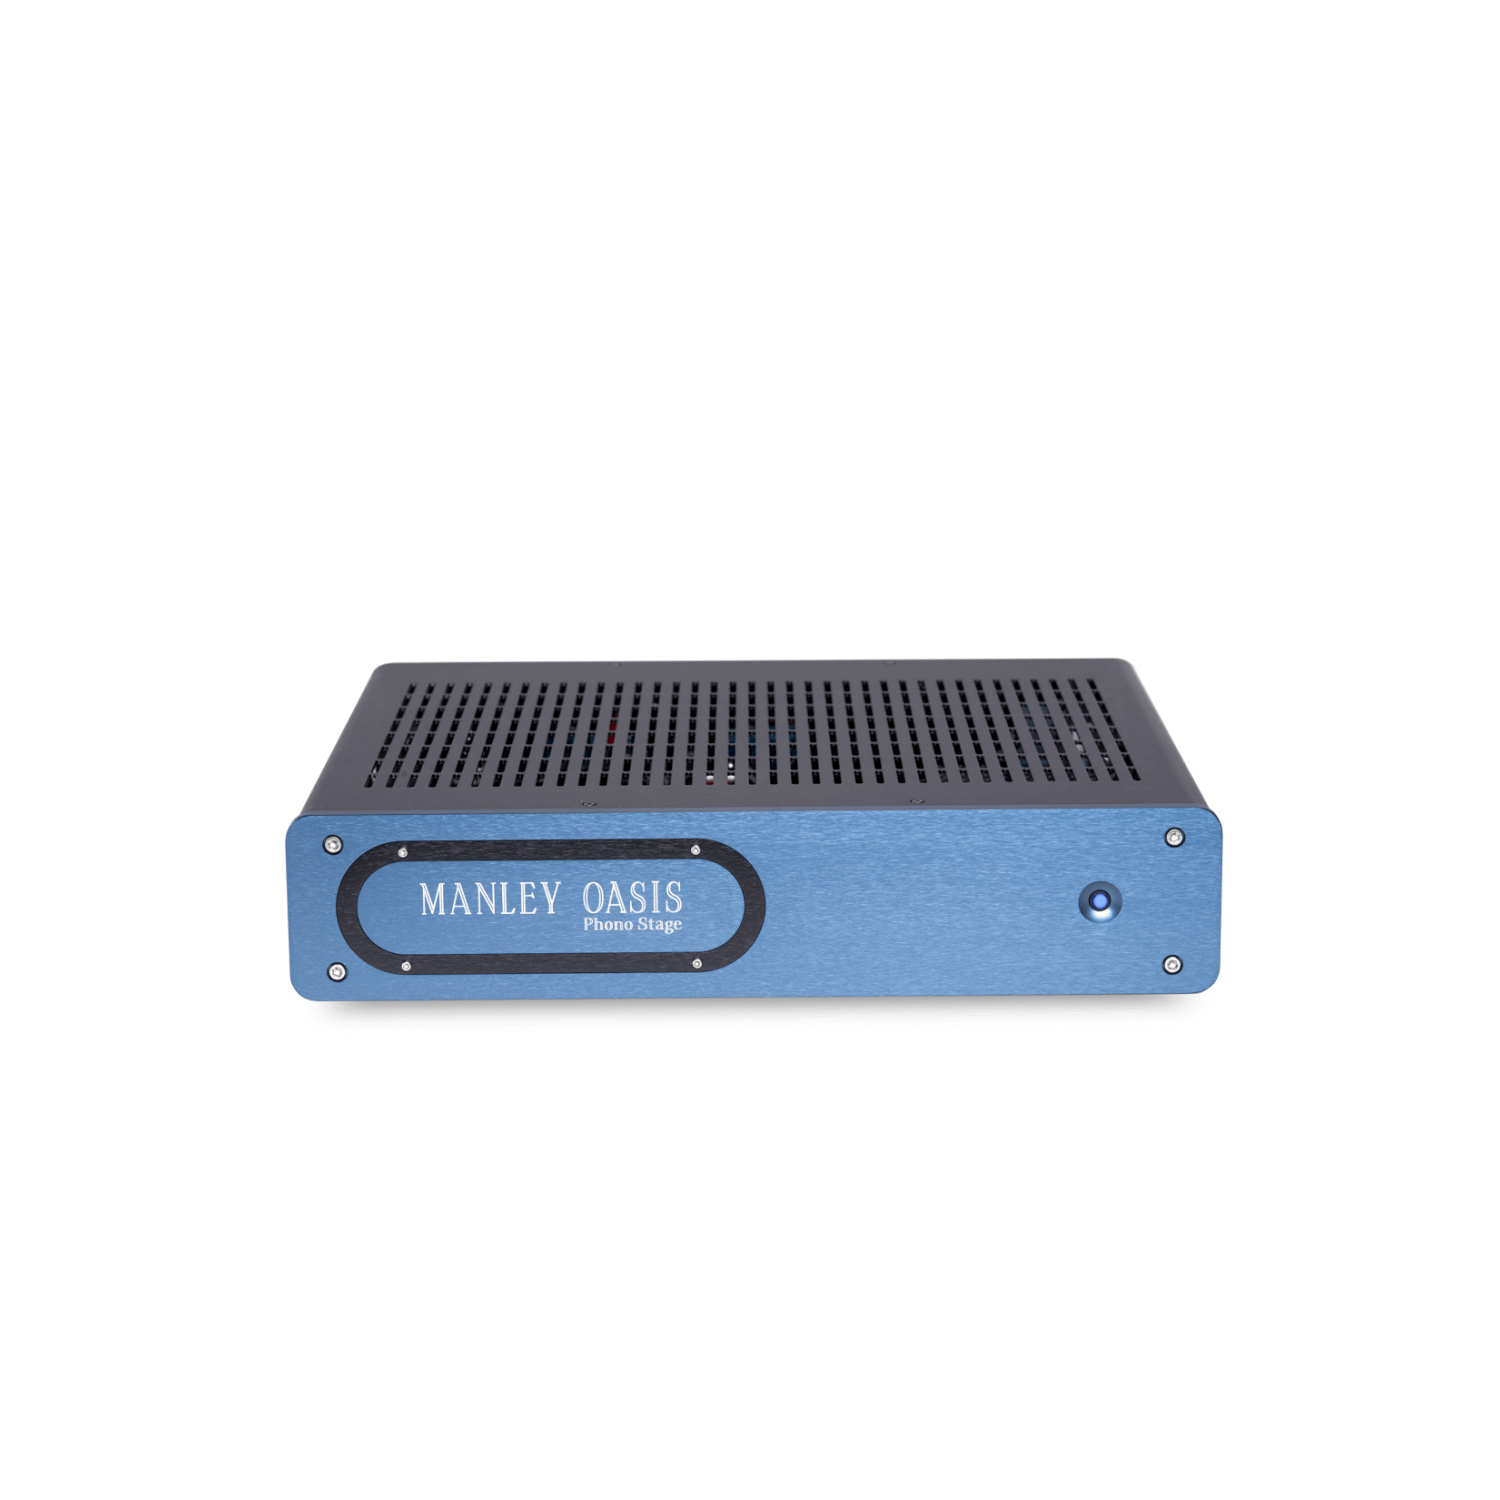 Manley OASIS Phono Stage finished in Manley Blue